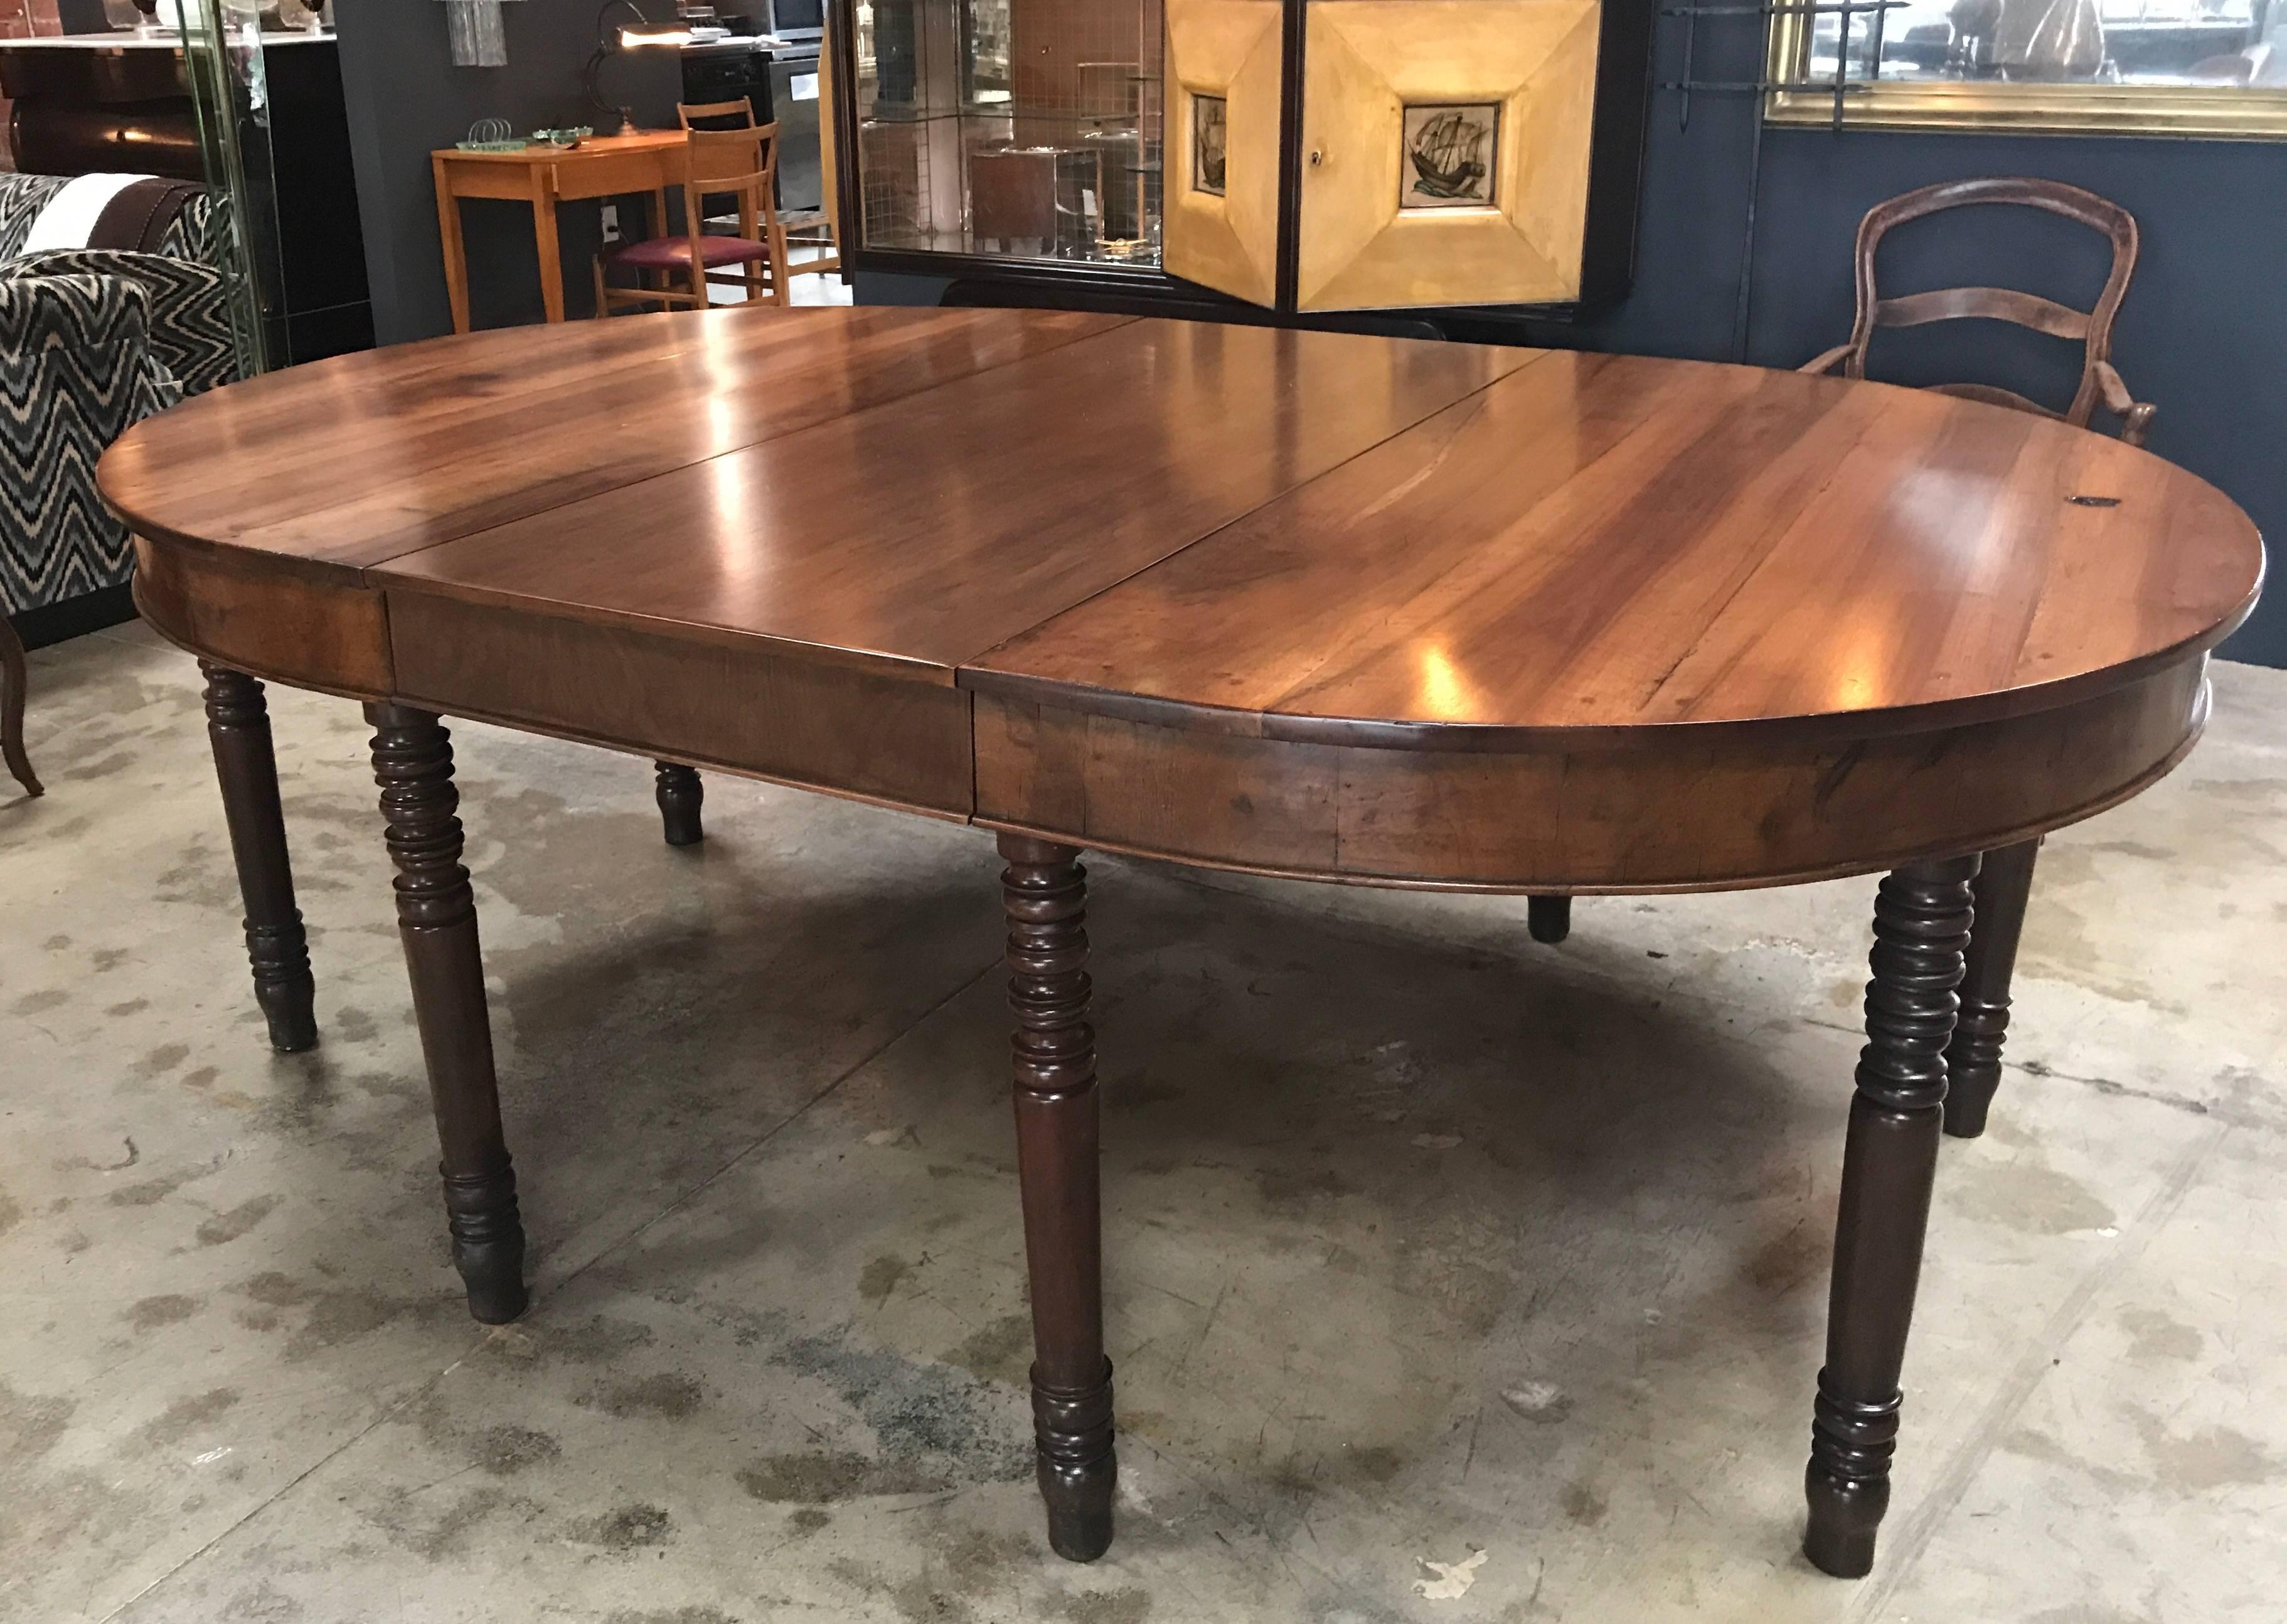 18th century Italian oval extending walnut dining table. Includes two leaves which measure 24" each.
Without extension this beauty measures 66" long and with both leaves becomes 114" in length.
  